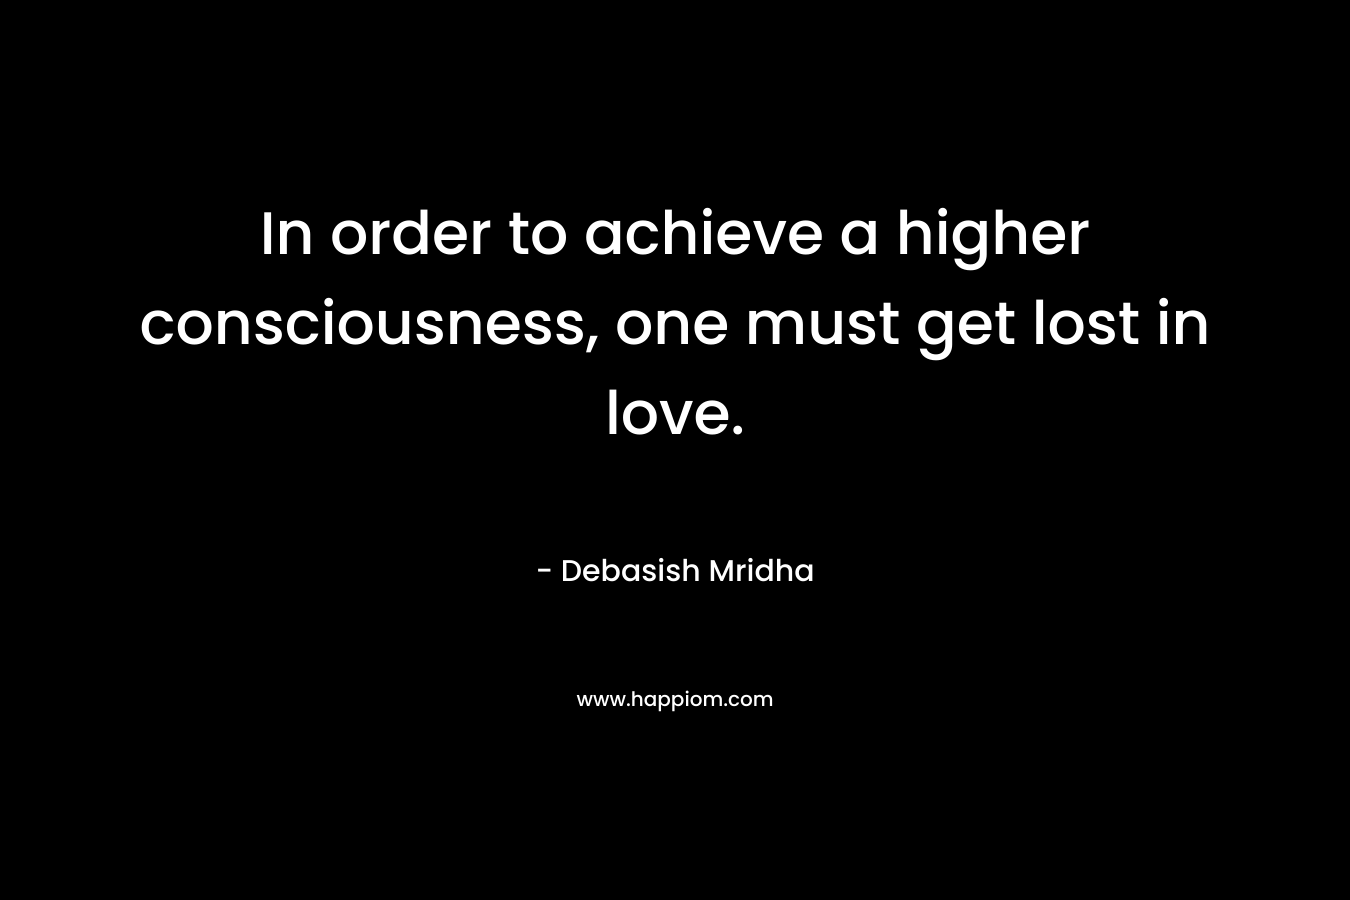 In order to achieve a higher consciousness, one must get lost in love.